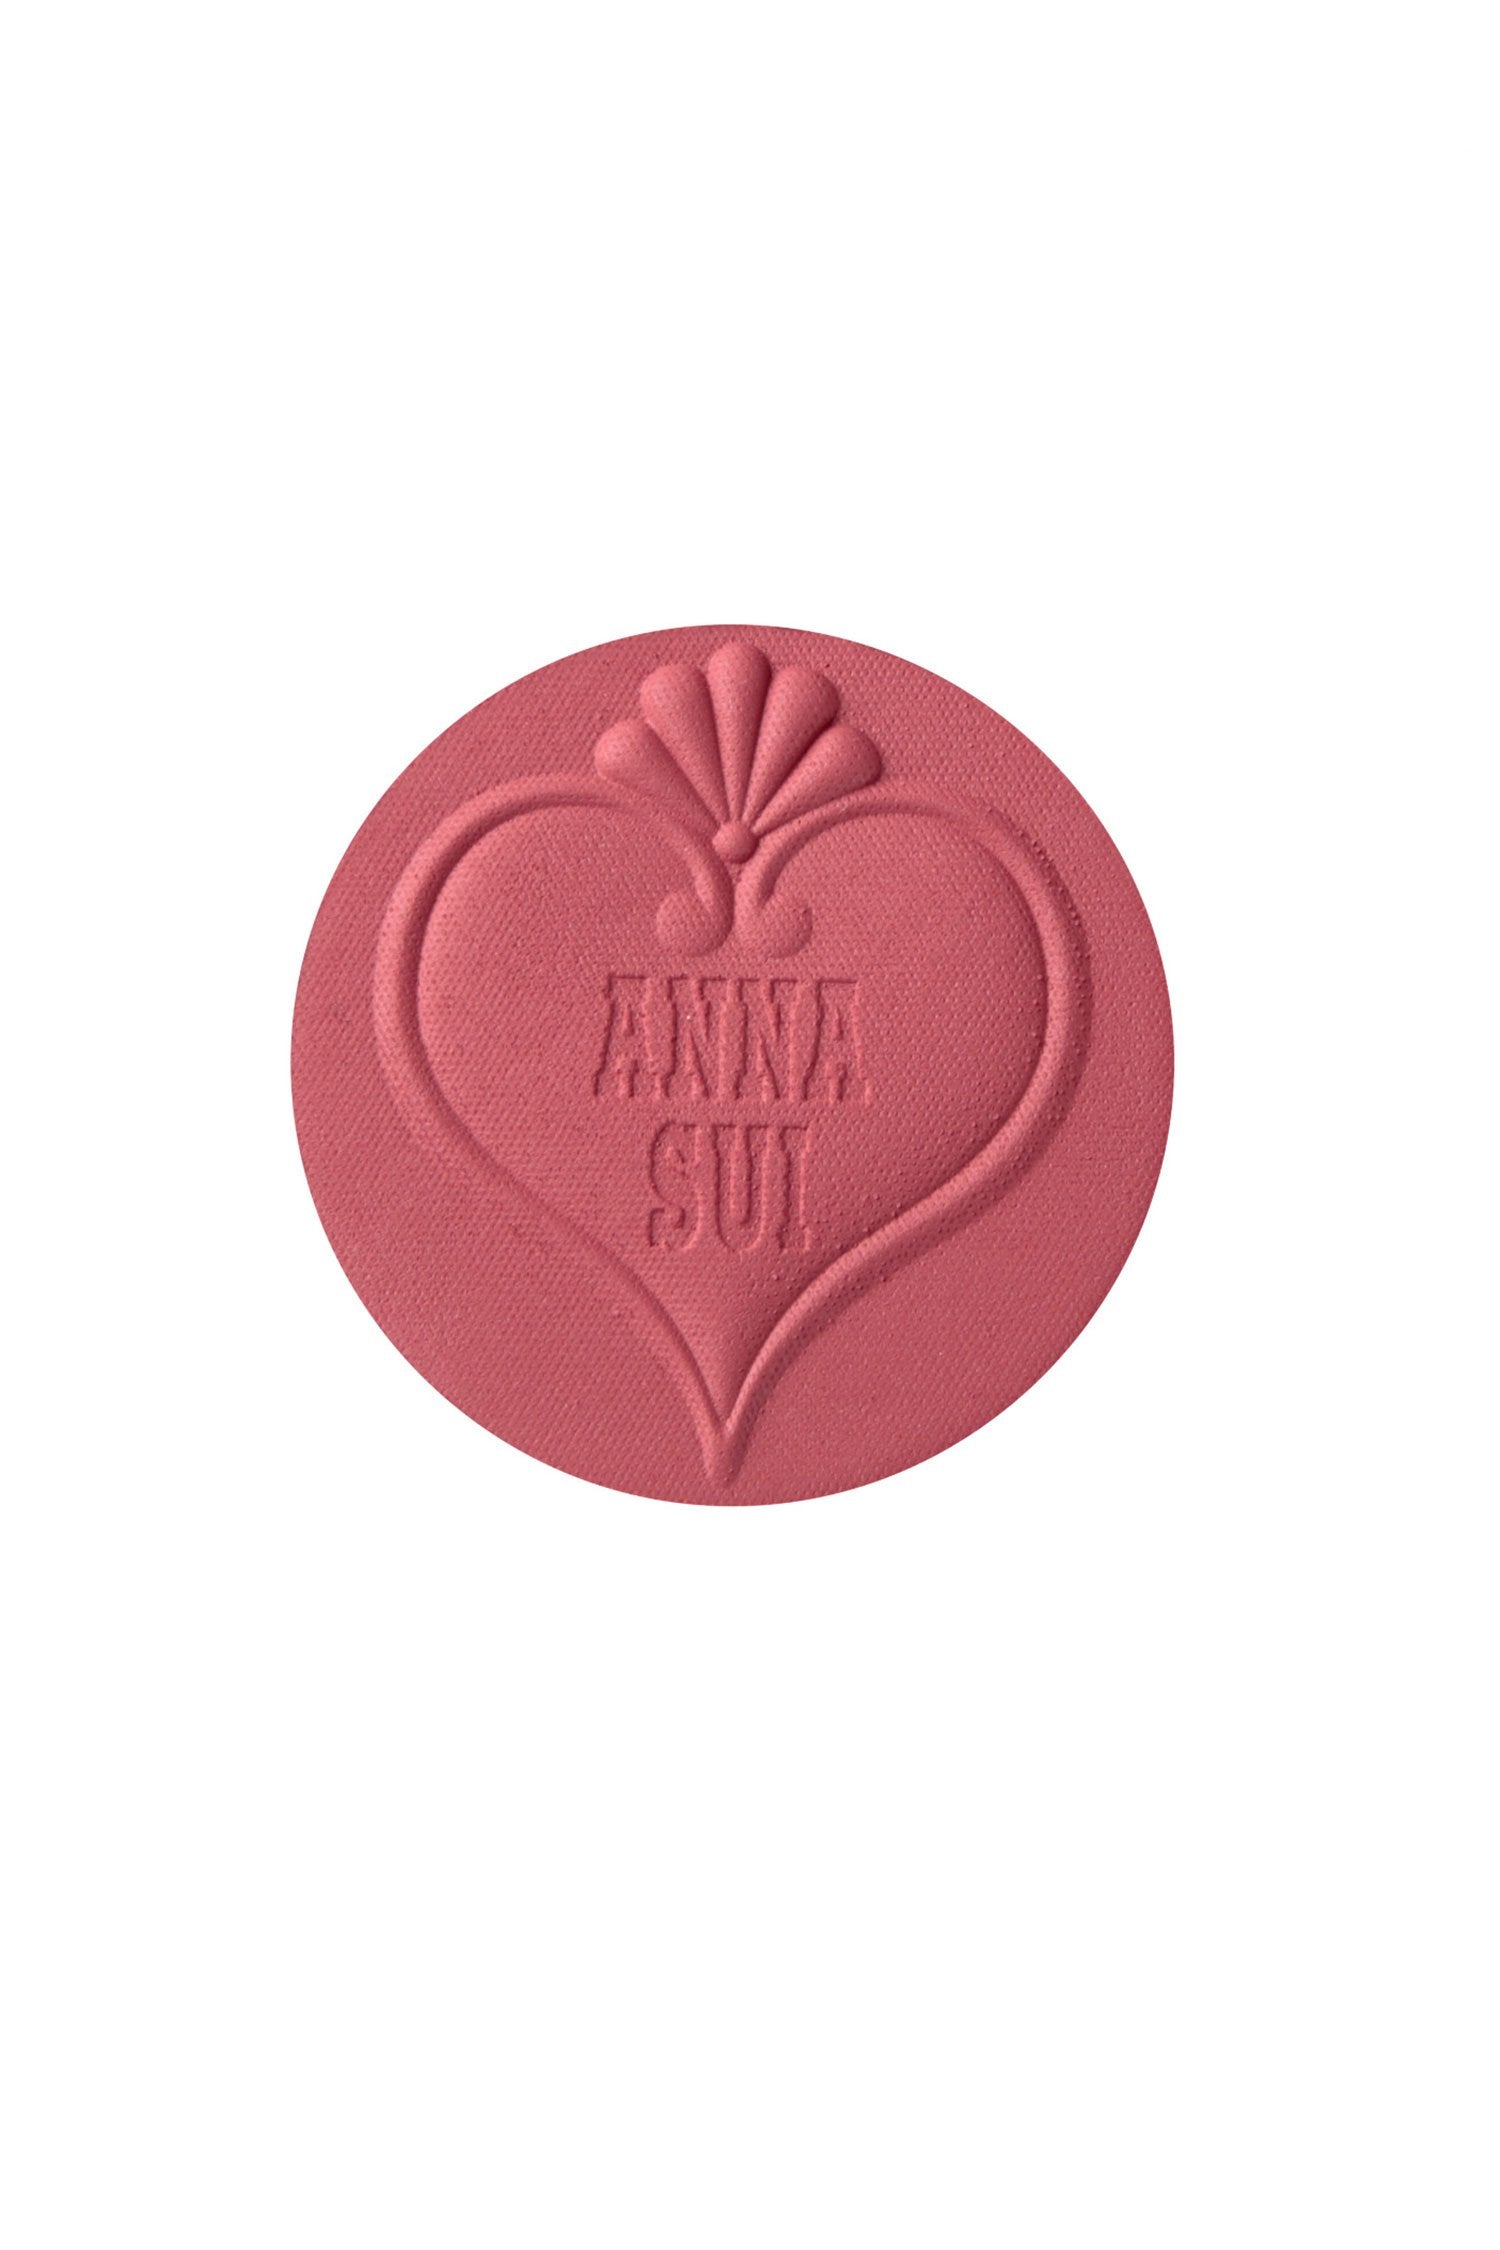 401 - Deep Red Sui Black - Powder Blush color, round, engraved hart, seashell on top, Anna Sui branding inside